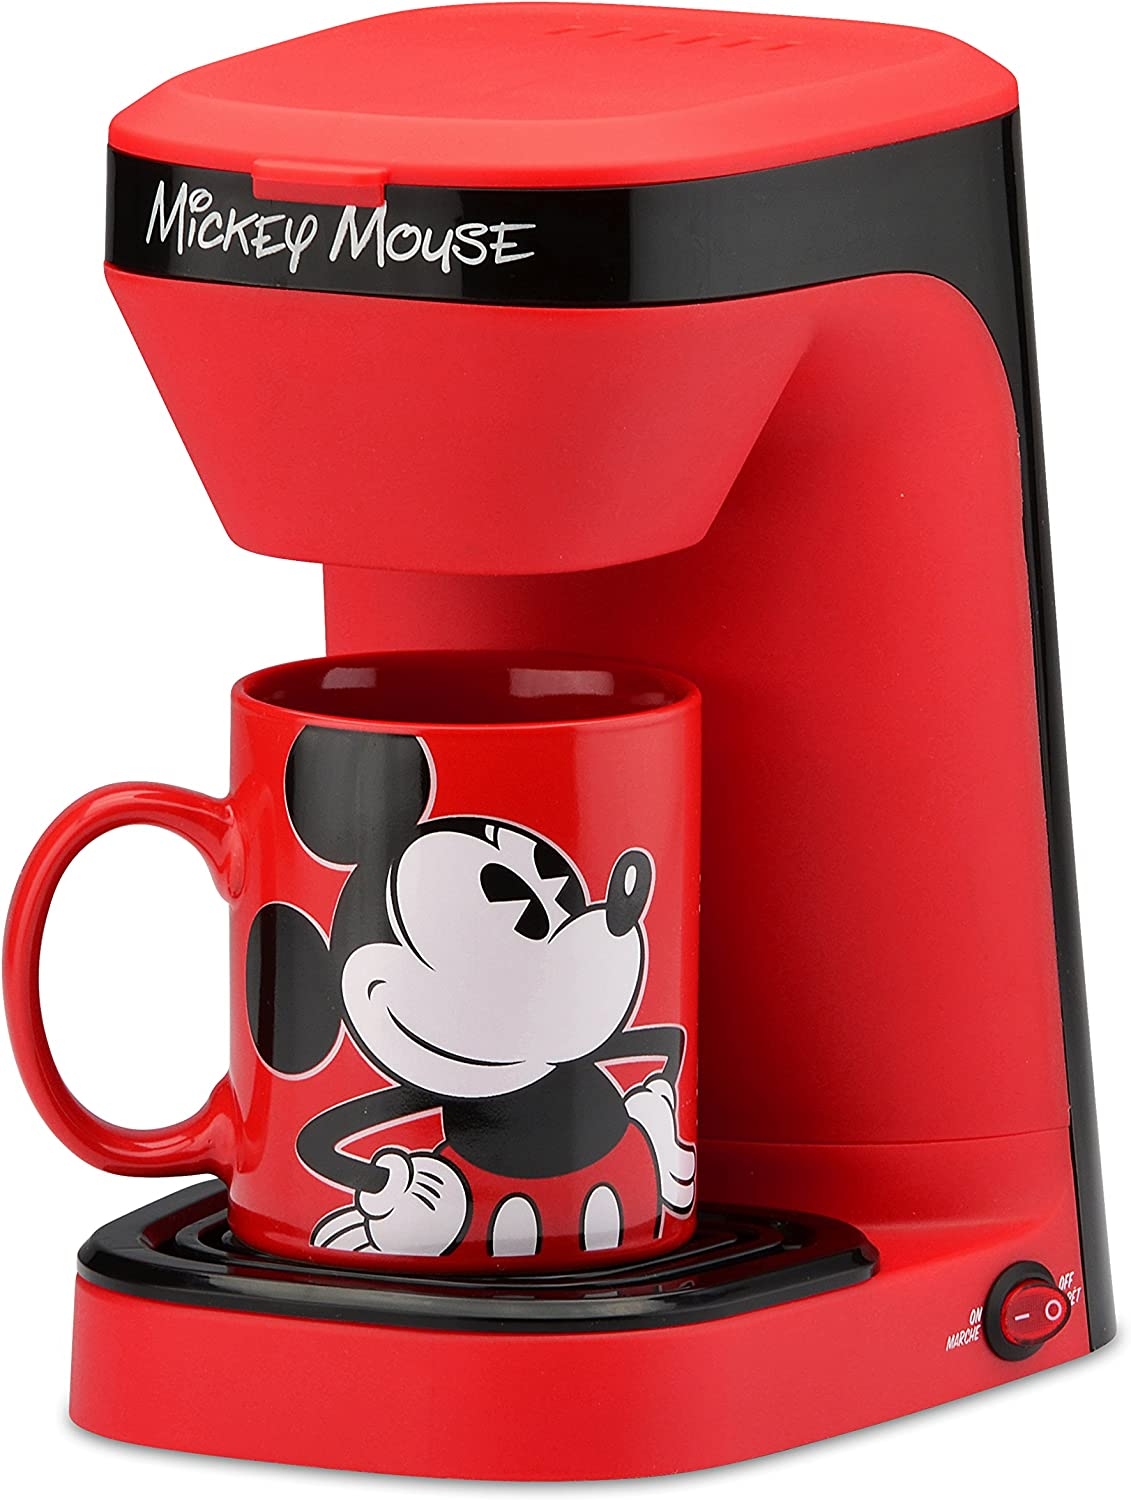 Disney Mickey Mouse 1-Cup Coffee Maker with Mug Import To Shop ×Product customization General Description Gallery Reviews